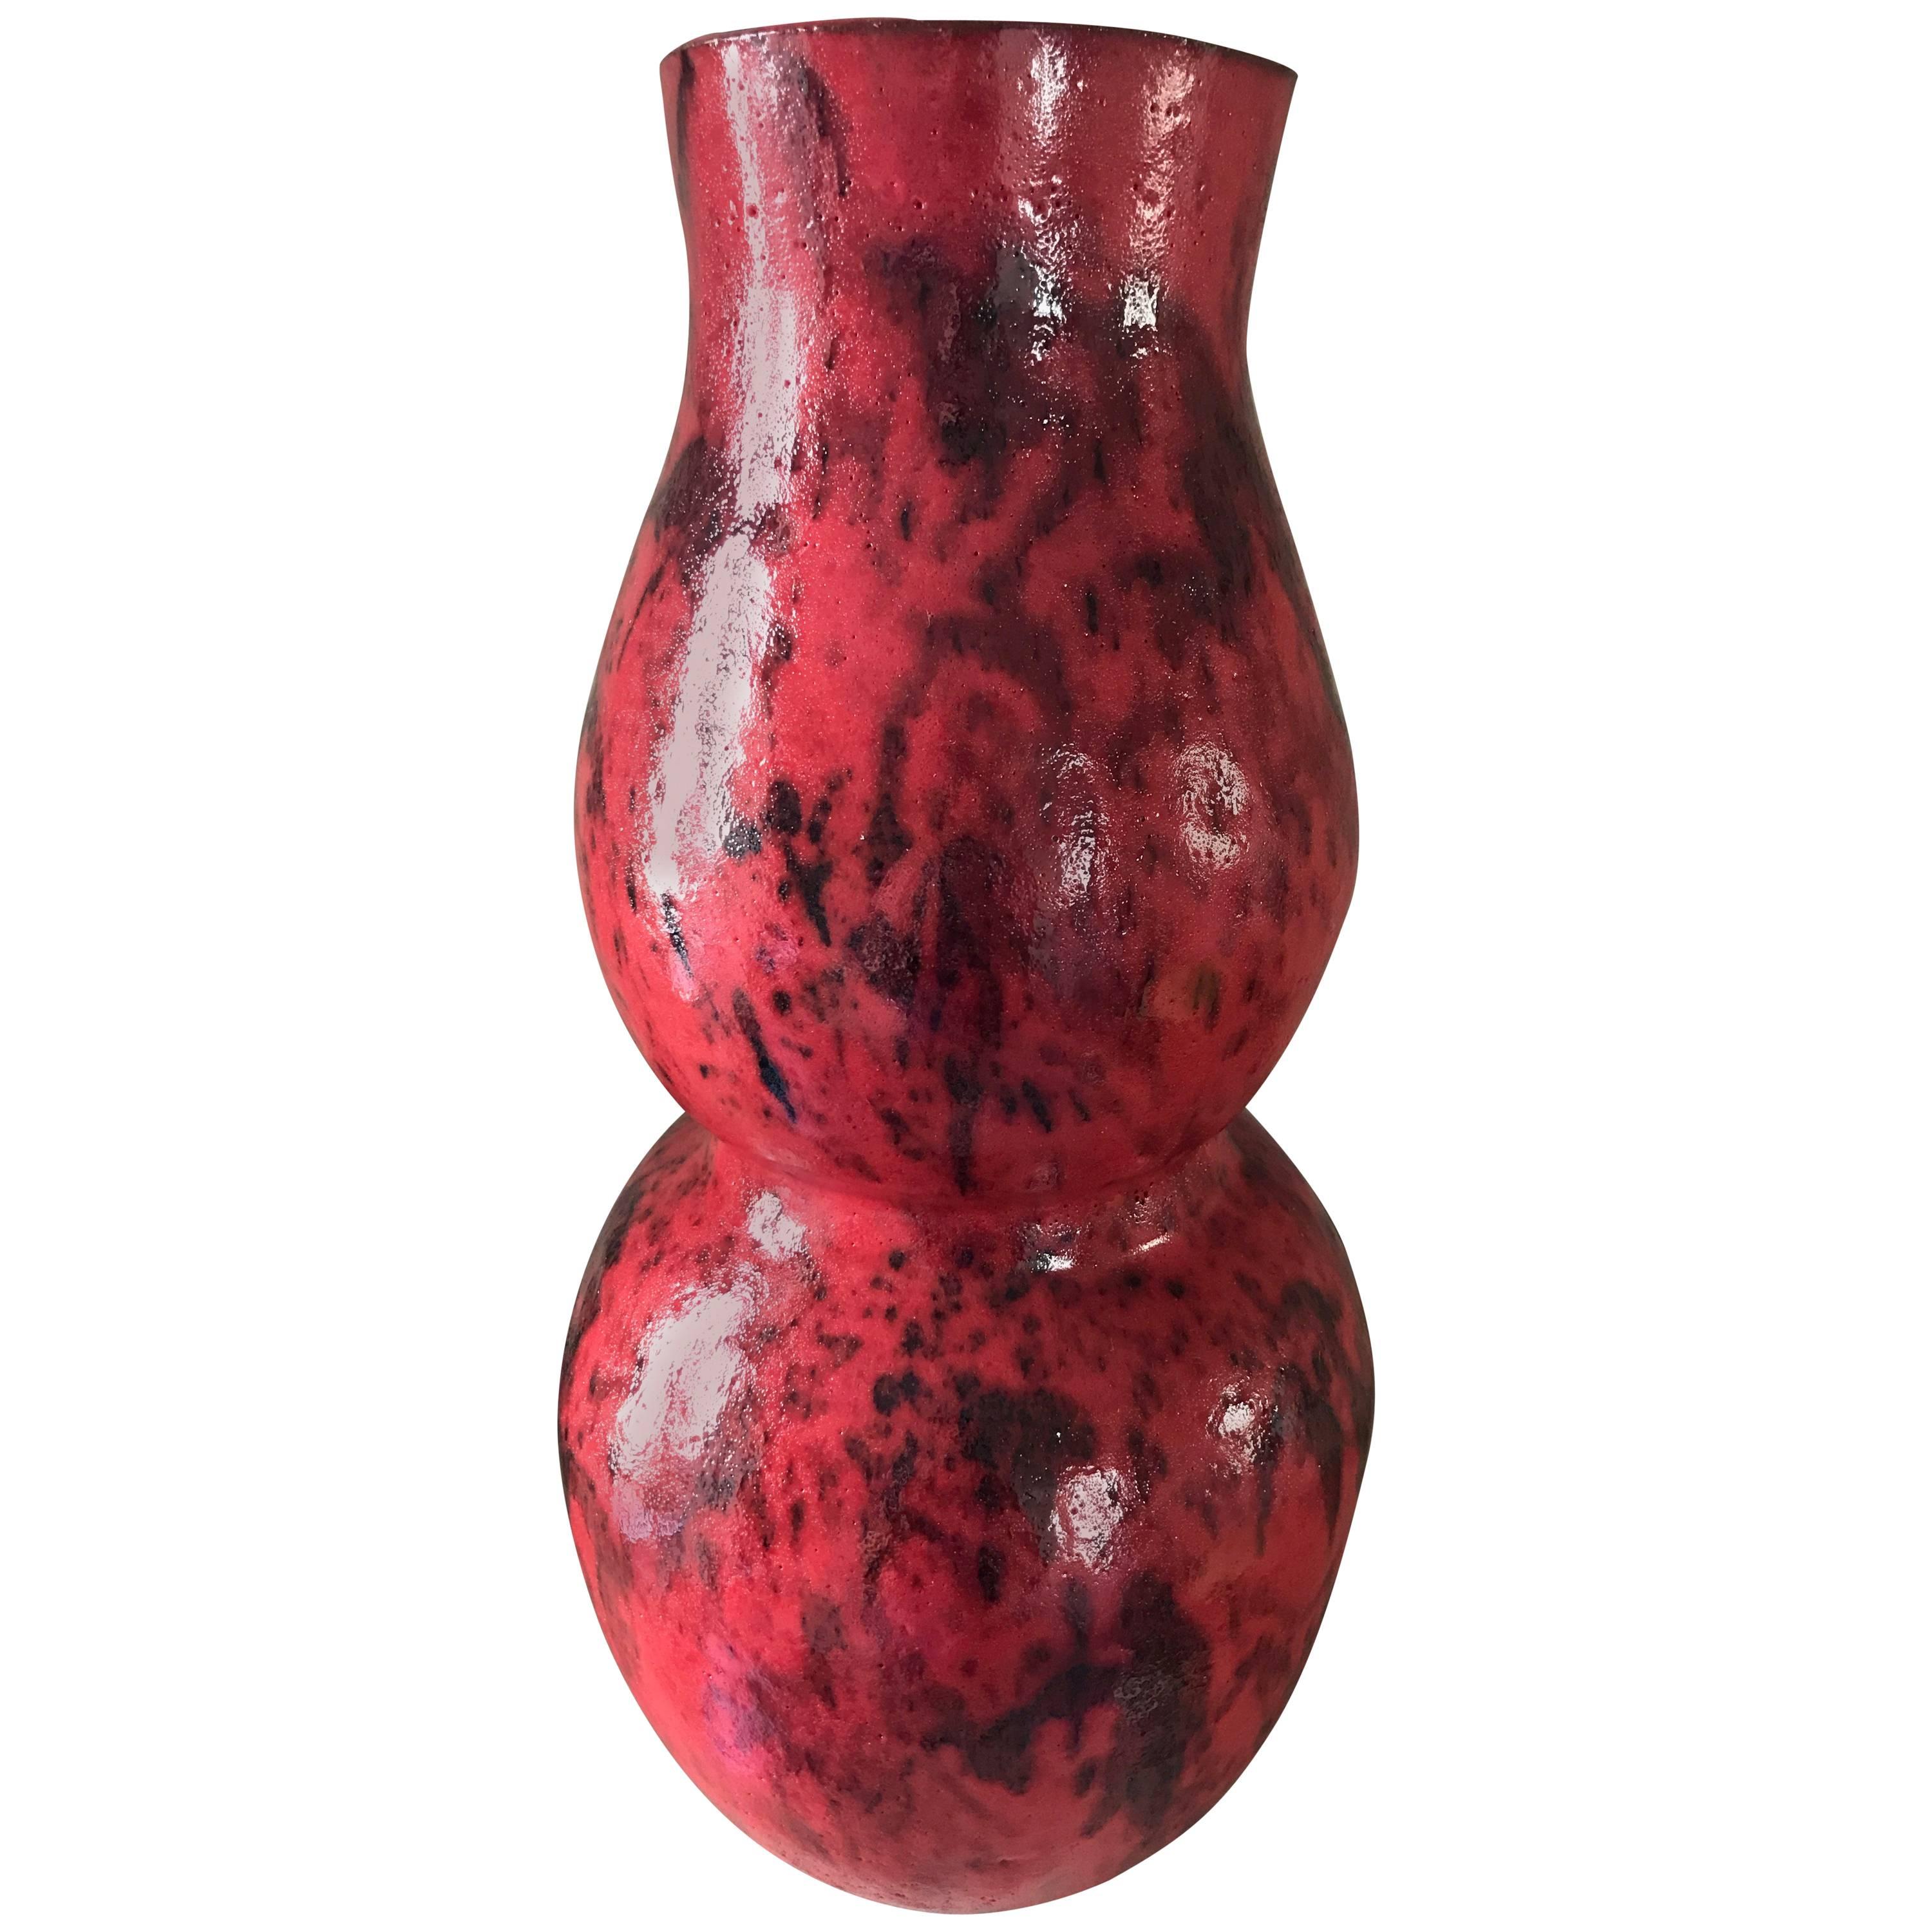 One striking, stylized, double gourd, handmade ceramic vase in a custom vibrant red and speckled black glaze, wired as a lamp base with an on/off switch on wire. Edison base socket.
This contemporary lamp has been custom designed and makes a